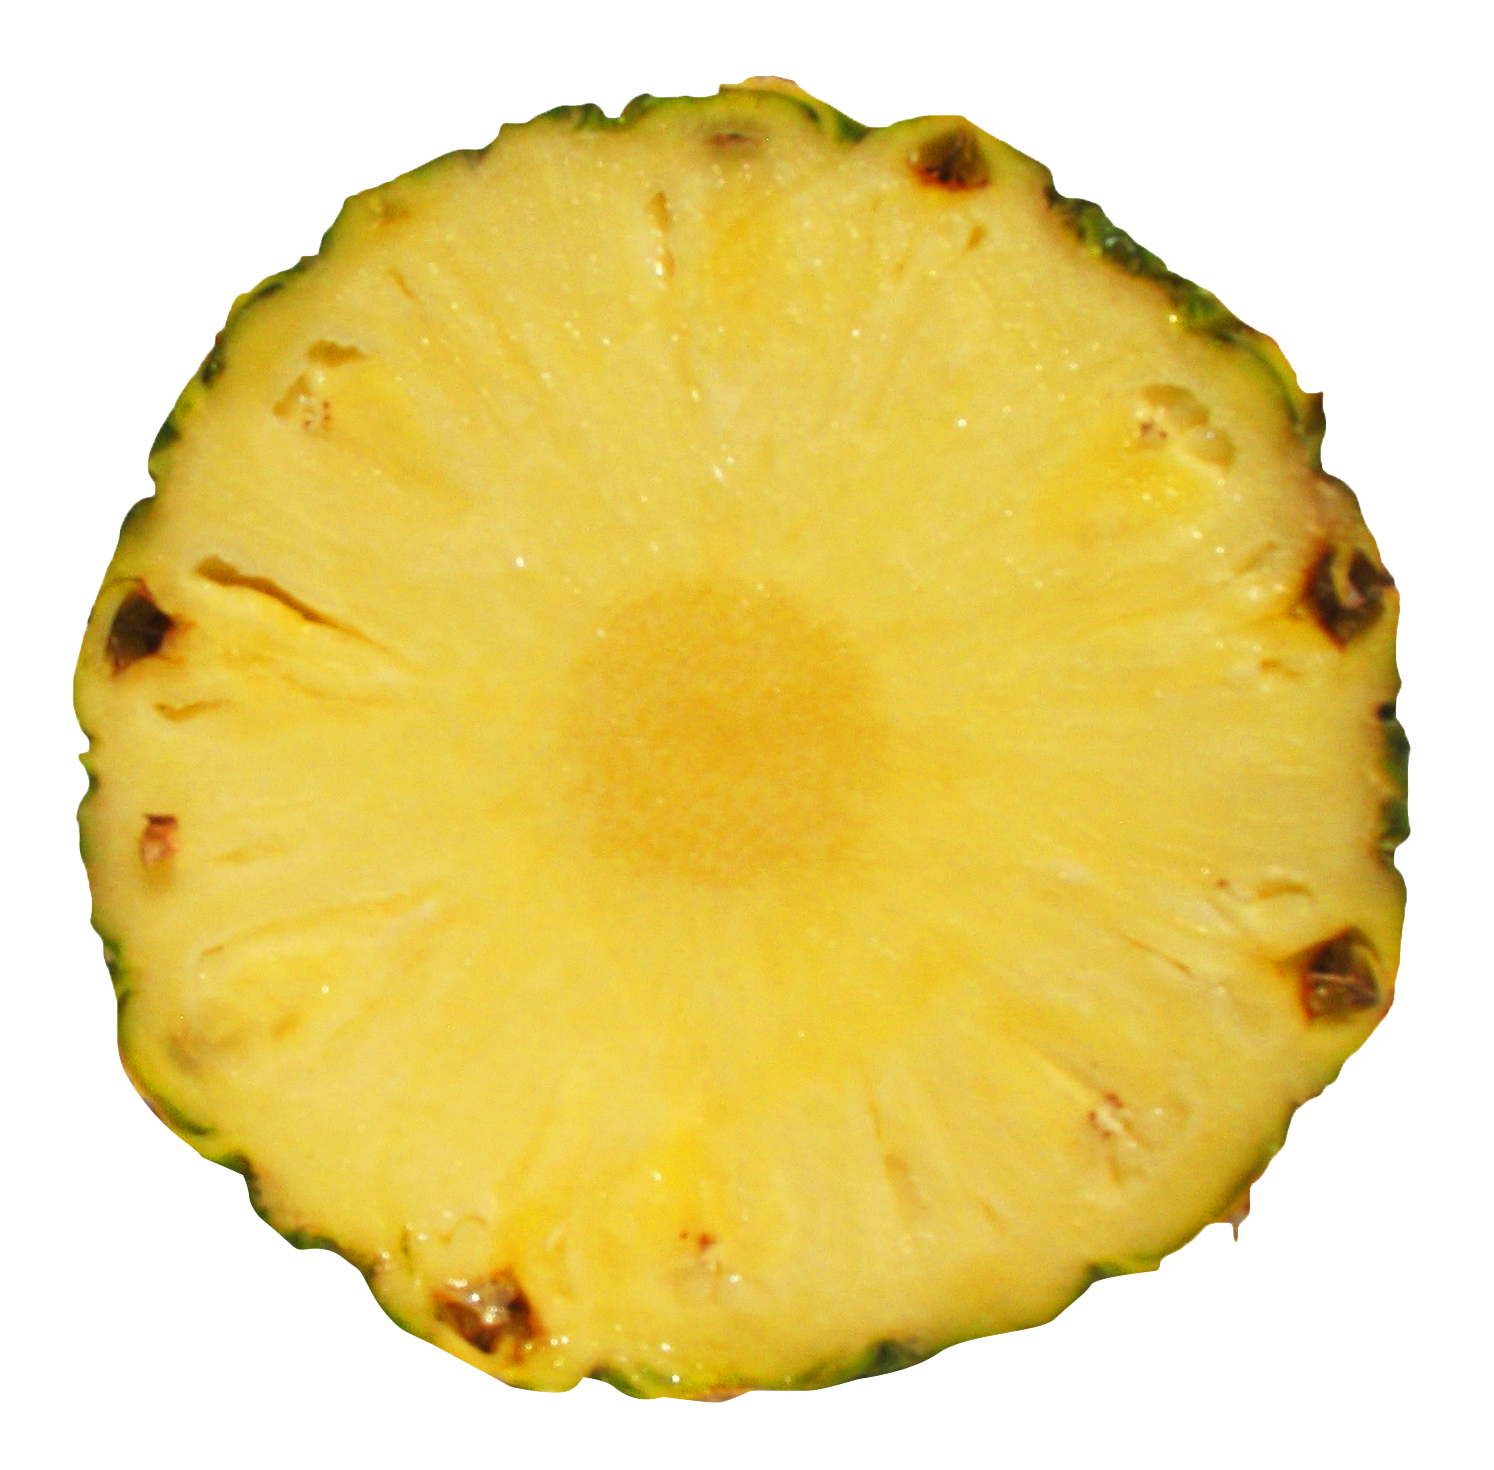 A Pineapple Slice On A Black Background